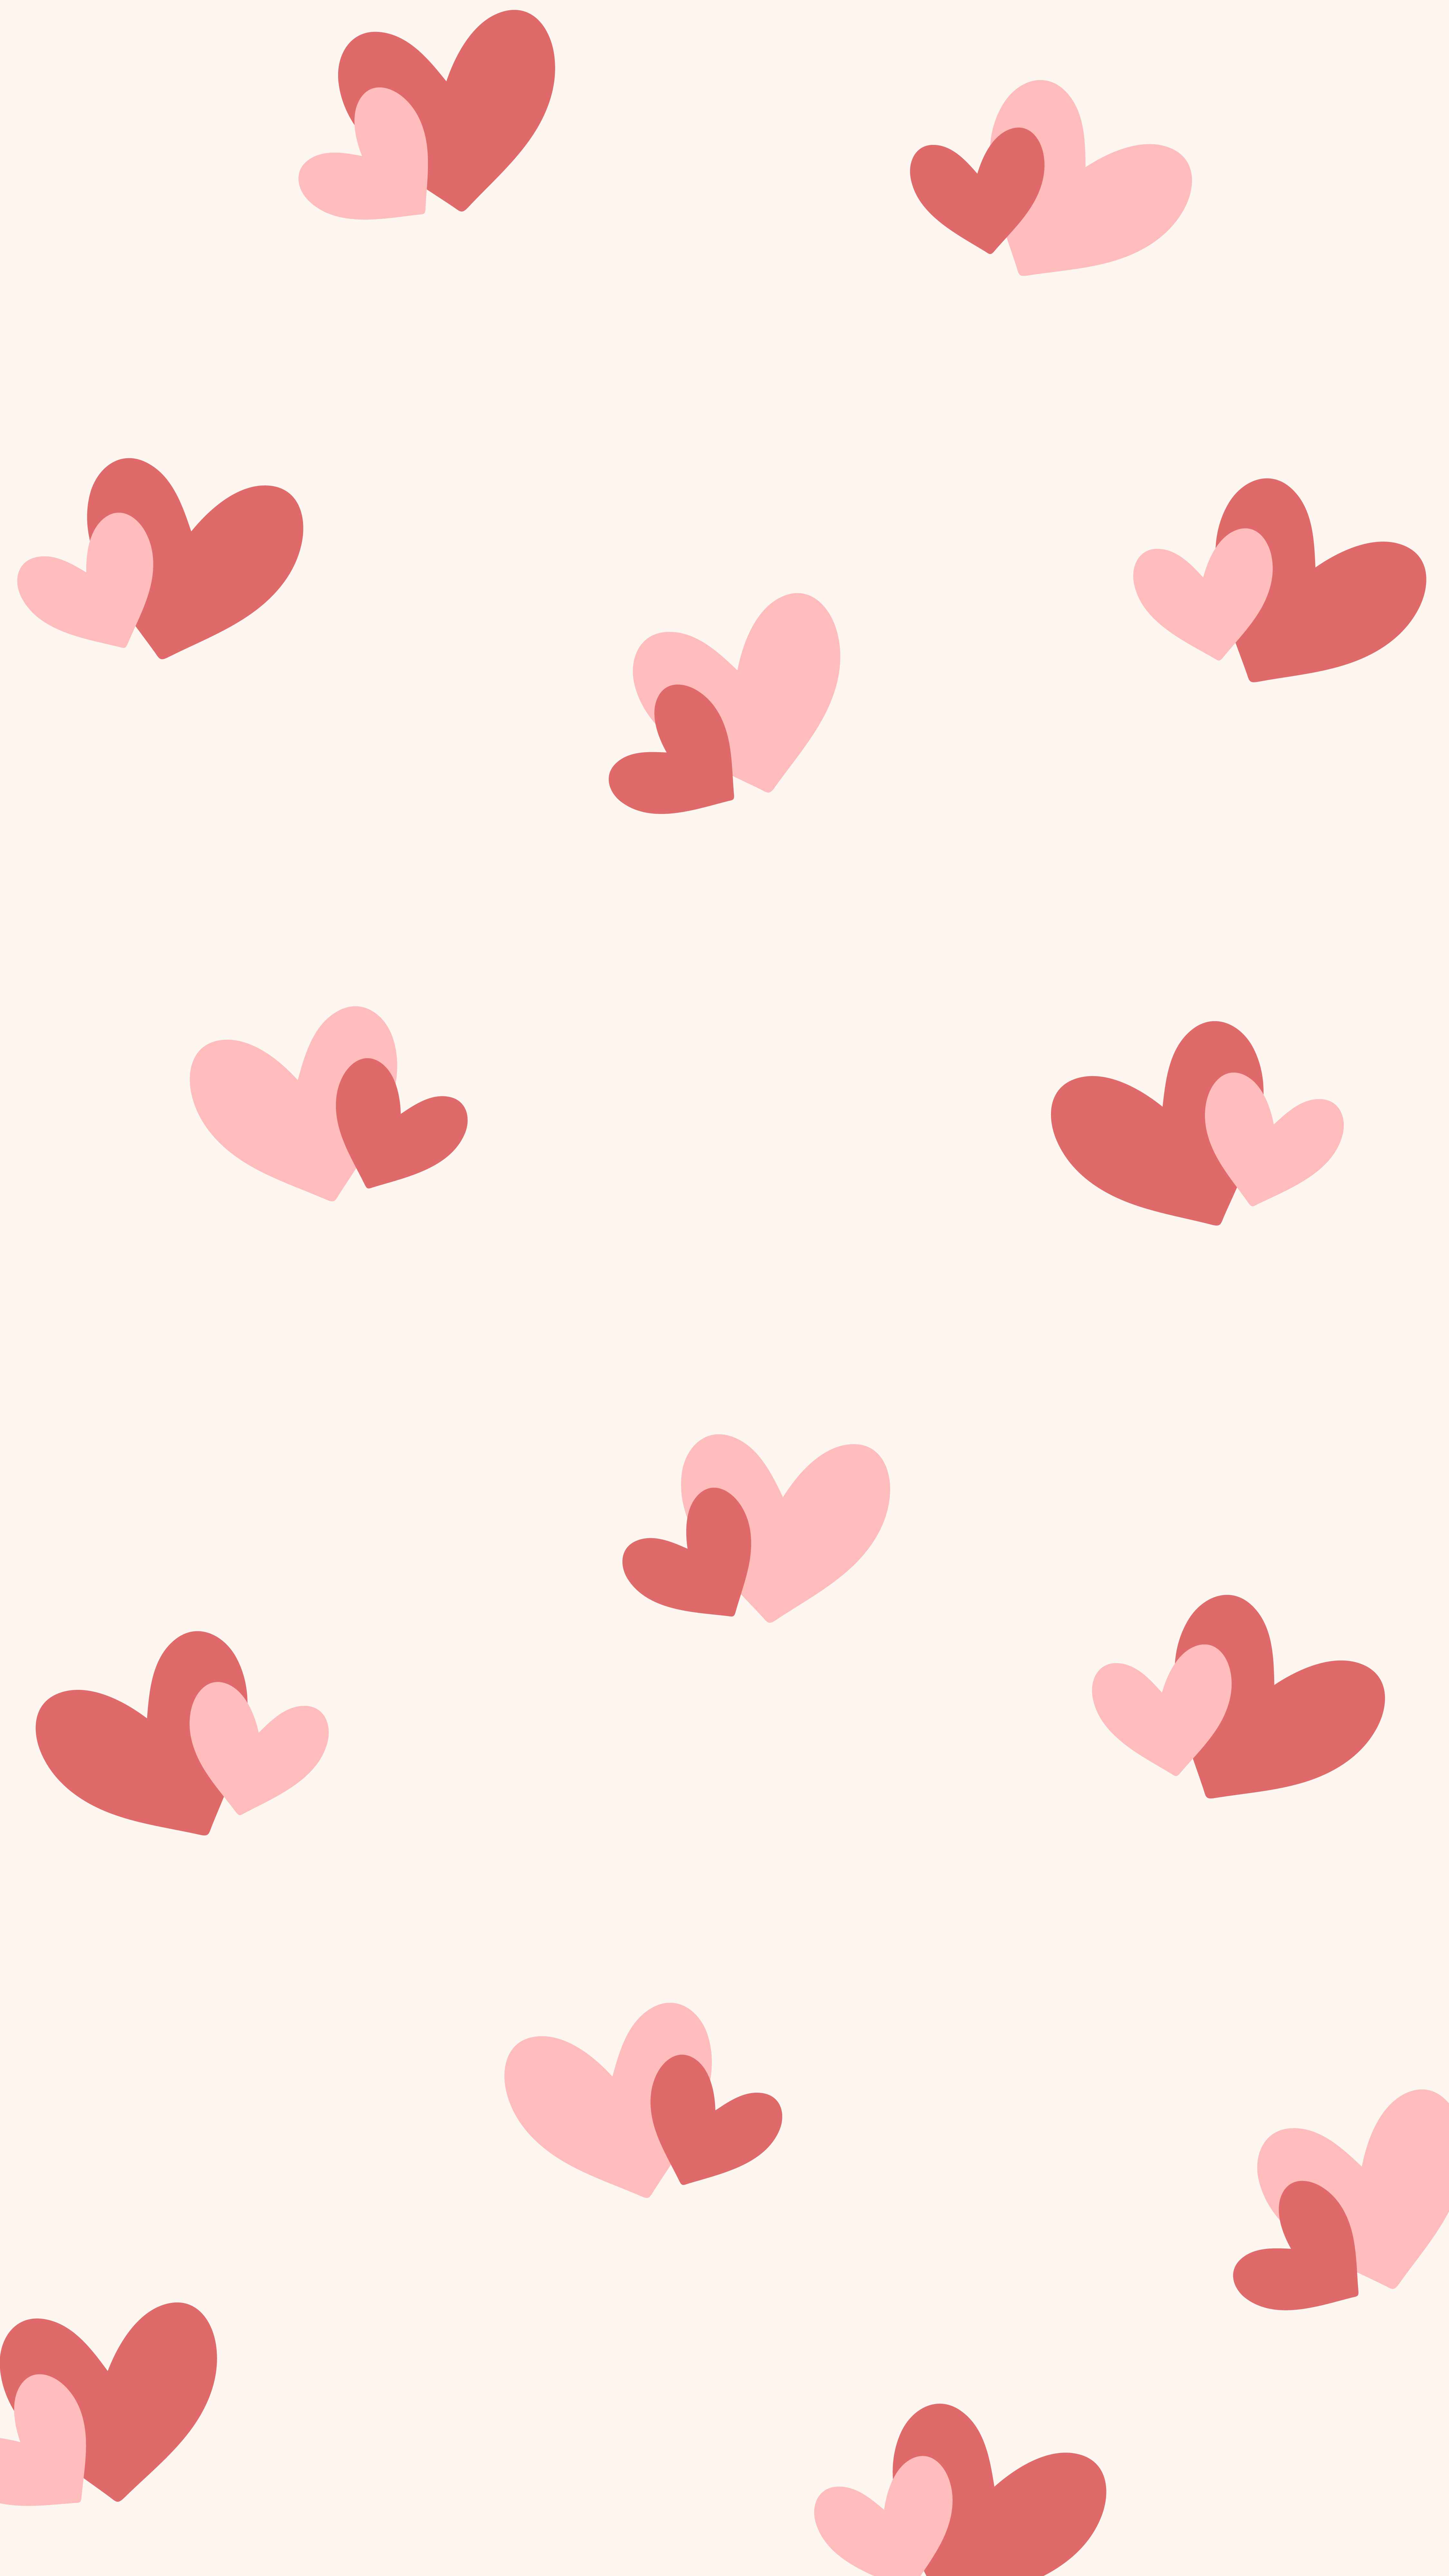 Free Pink and Red Heart Background | EPS, Illustrator, JPG, SVG ...